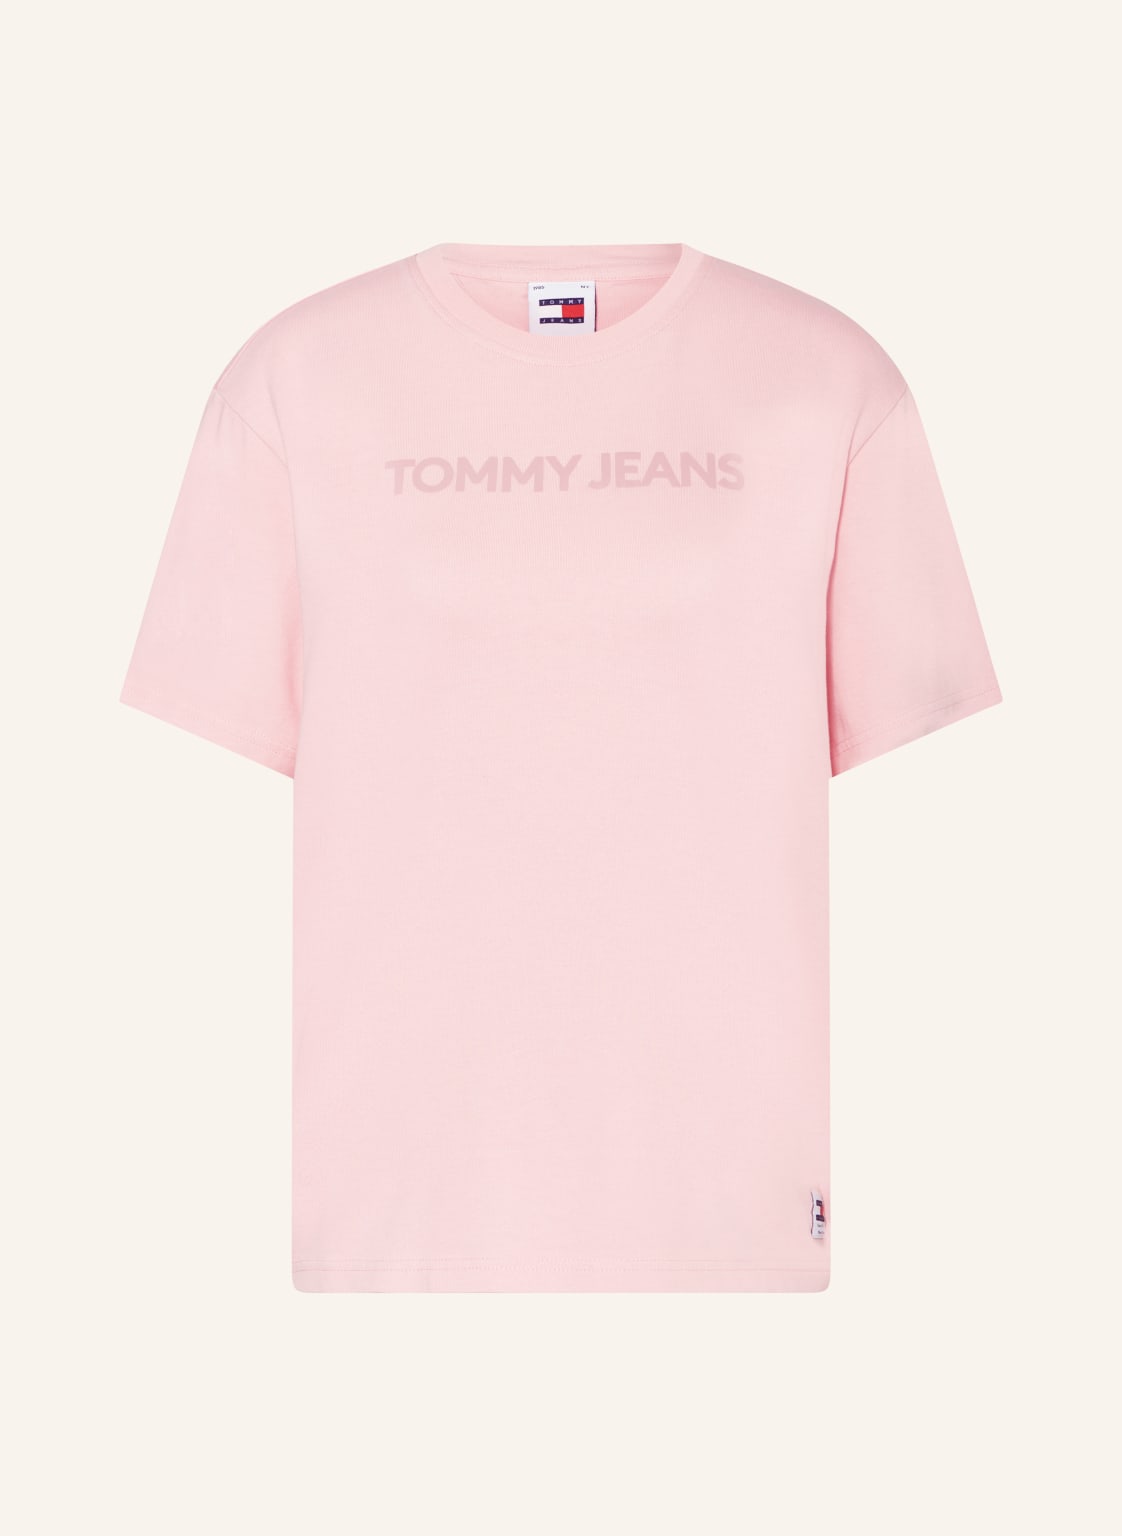 Tommy Jeans T-Shirt rosa von Tommy Jeans